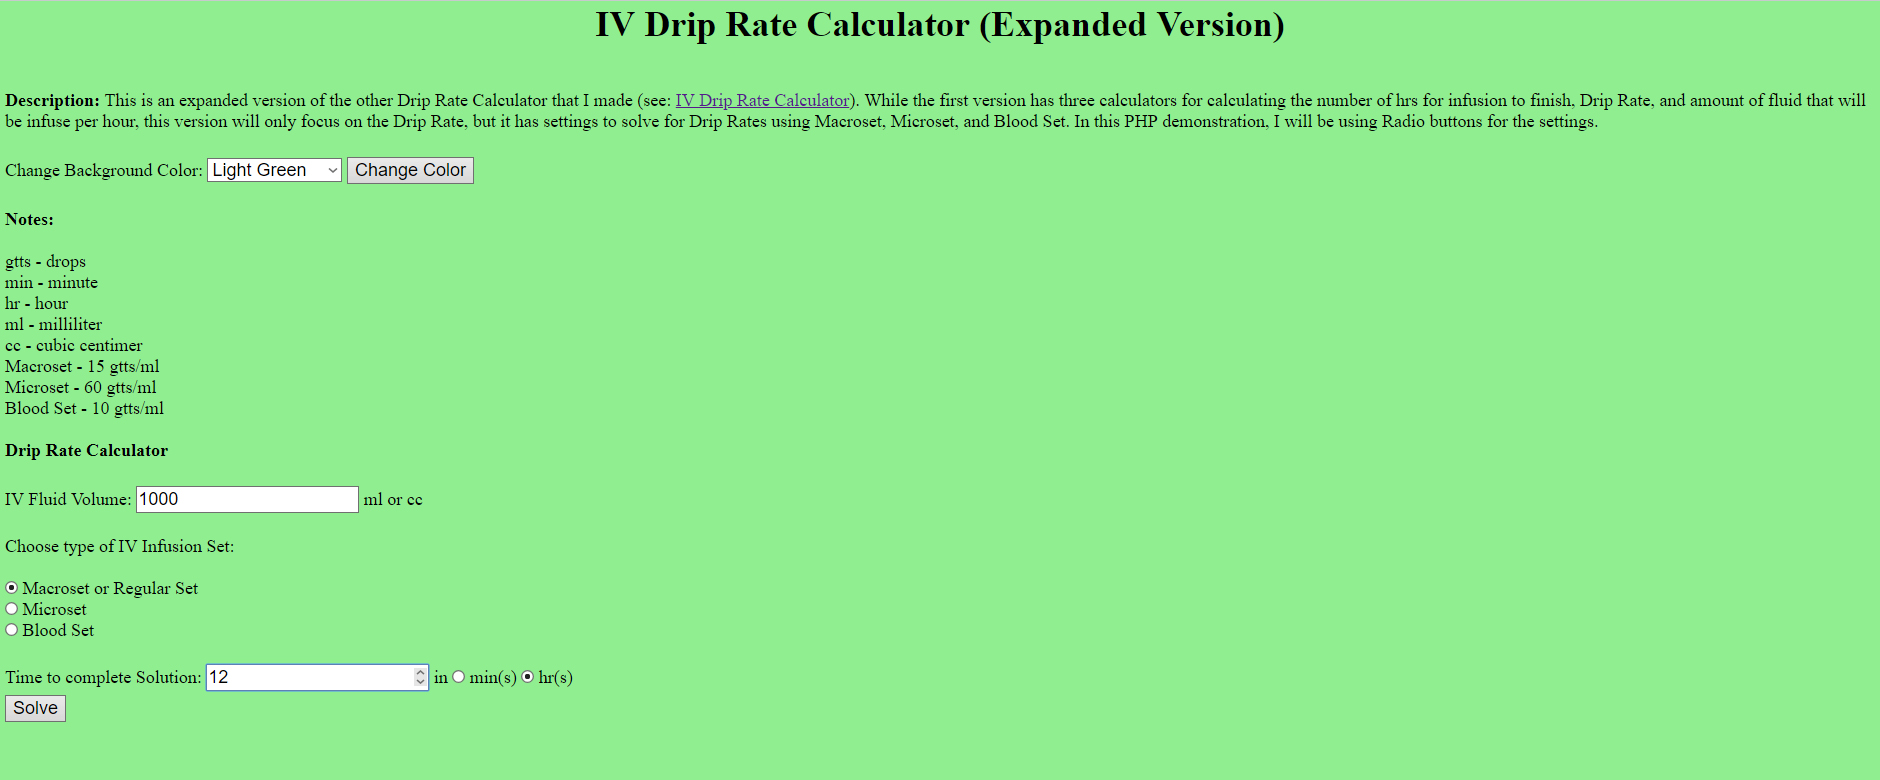 IV Drip Rate Calculator (Expanded Version)